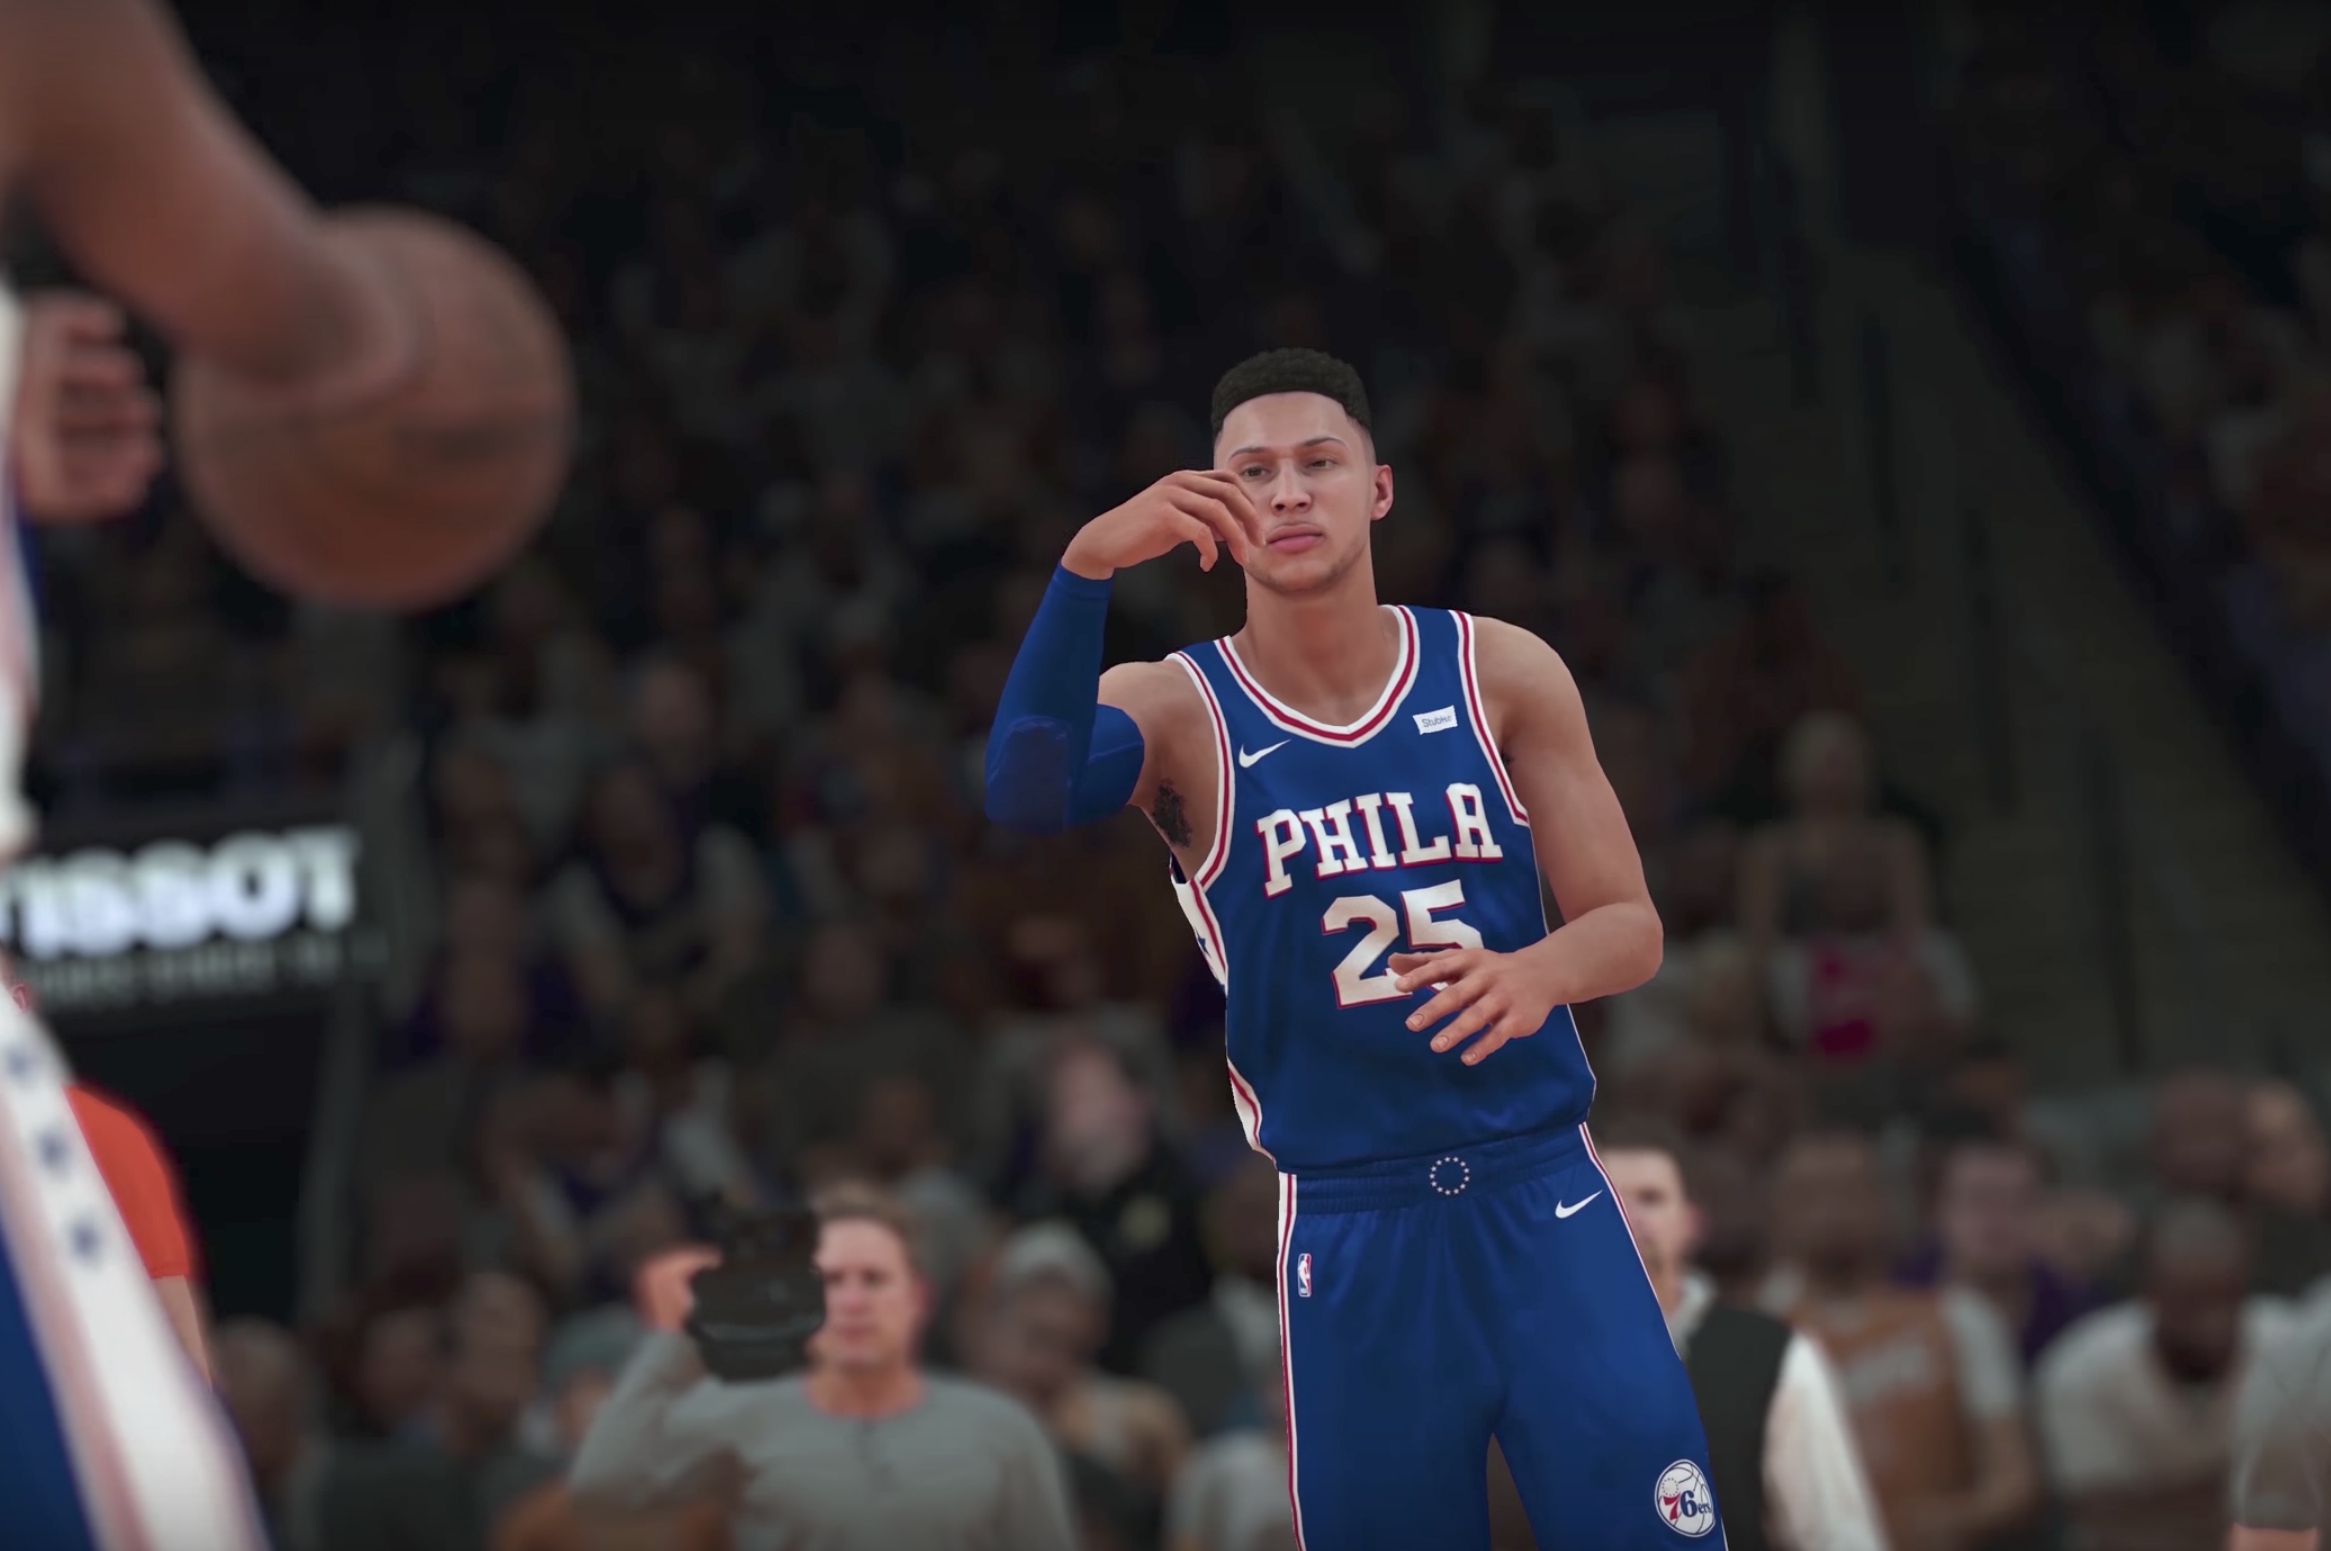 Meet the Brains Behind the NBA 2K18 Player Ratings